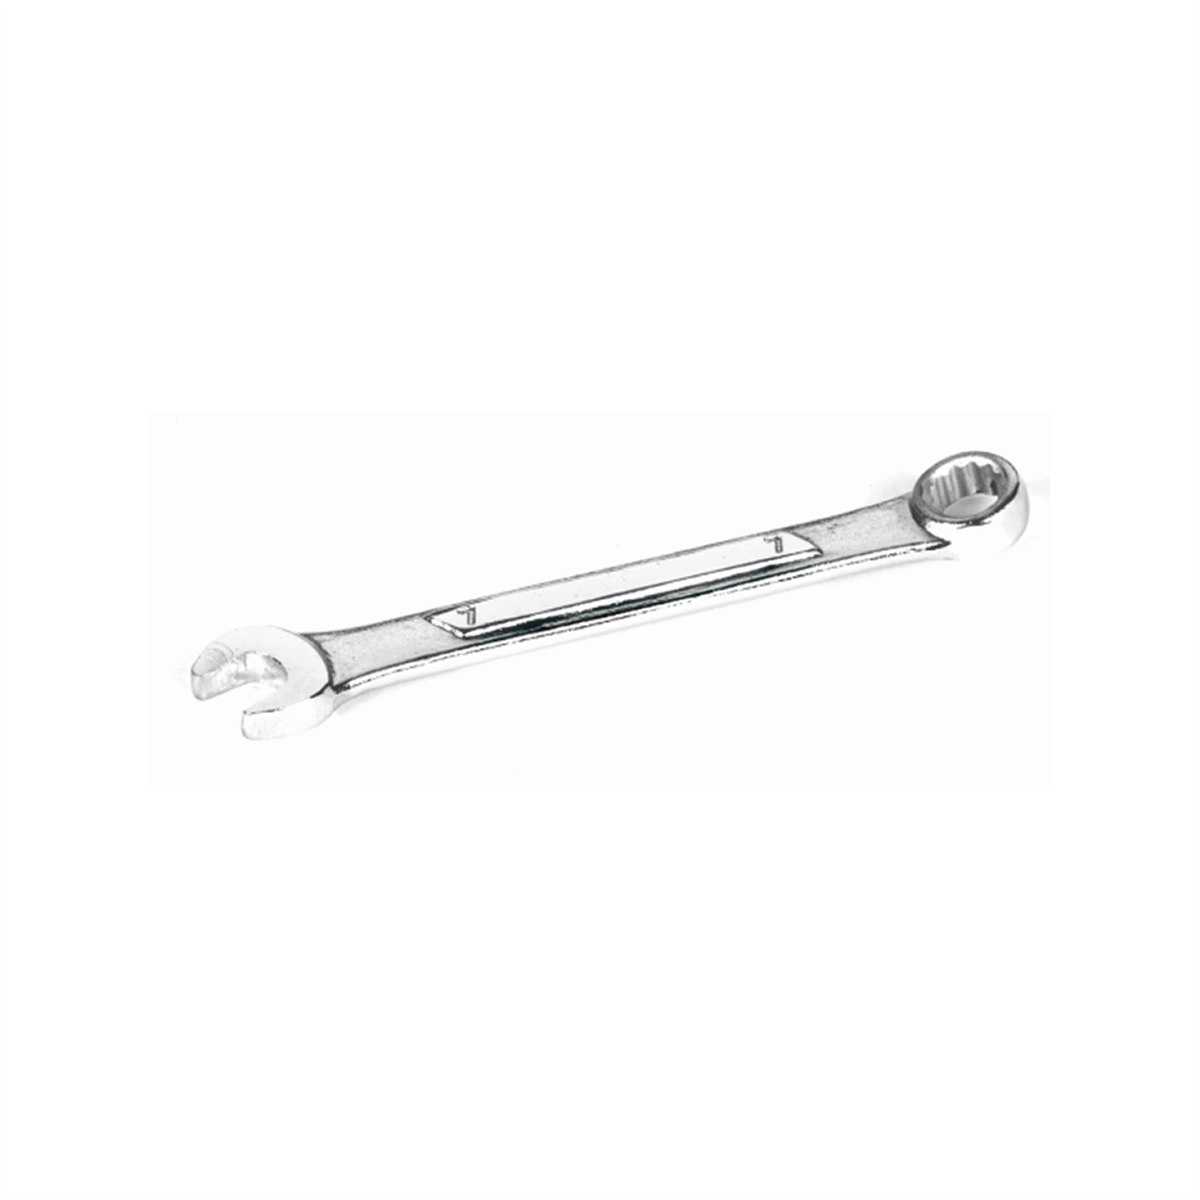 7mm Metric Comb Wrench